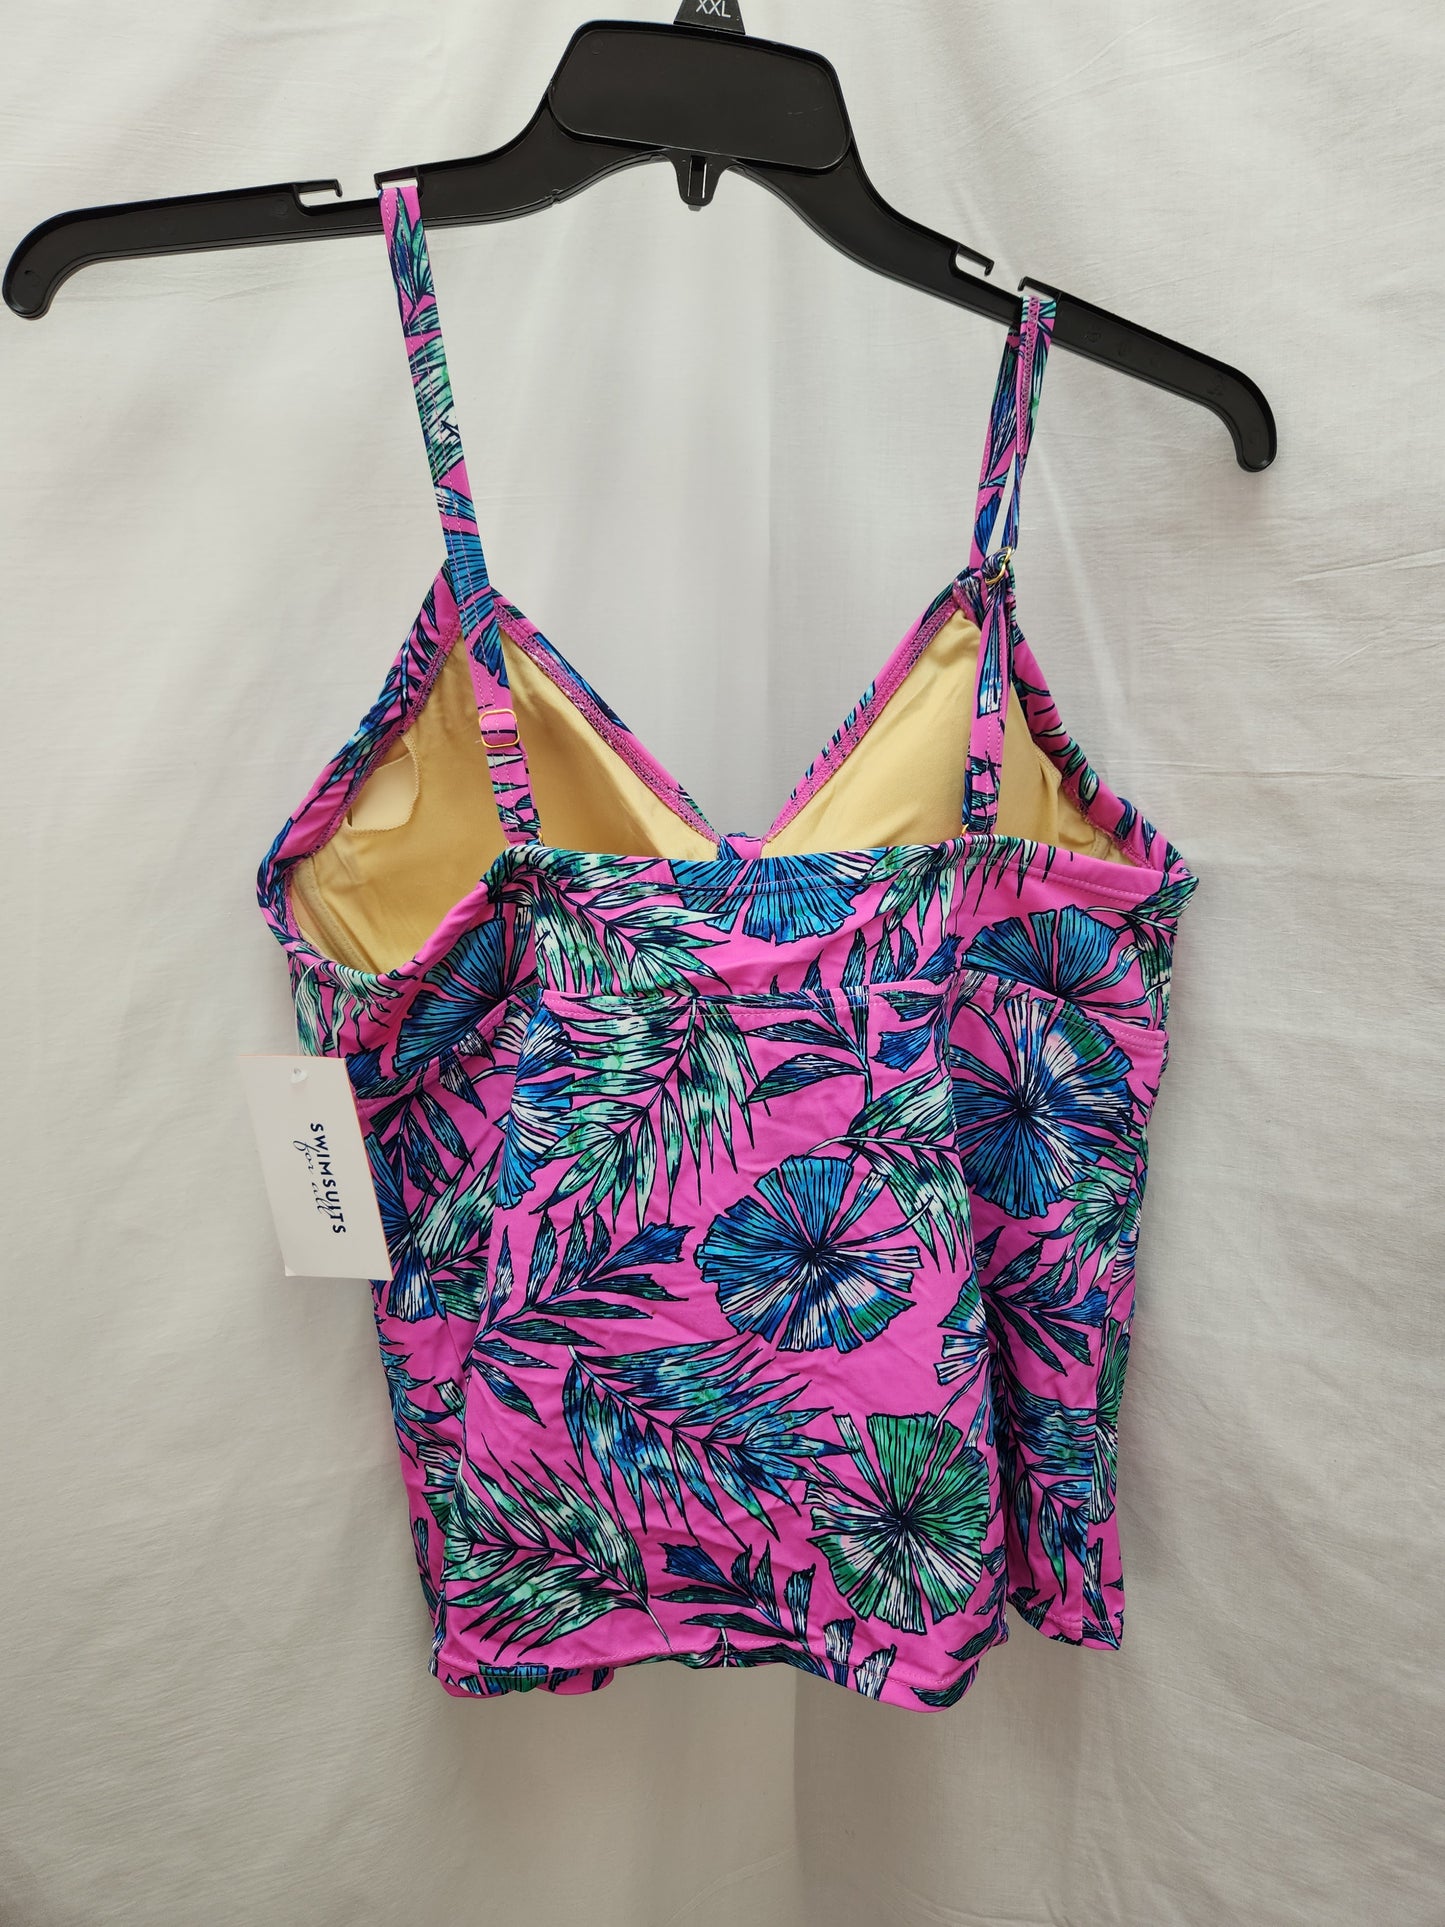 NWT - Swimsuits For All Floral Tie-Front tankini Top - 14 C/D